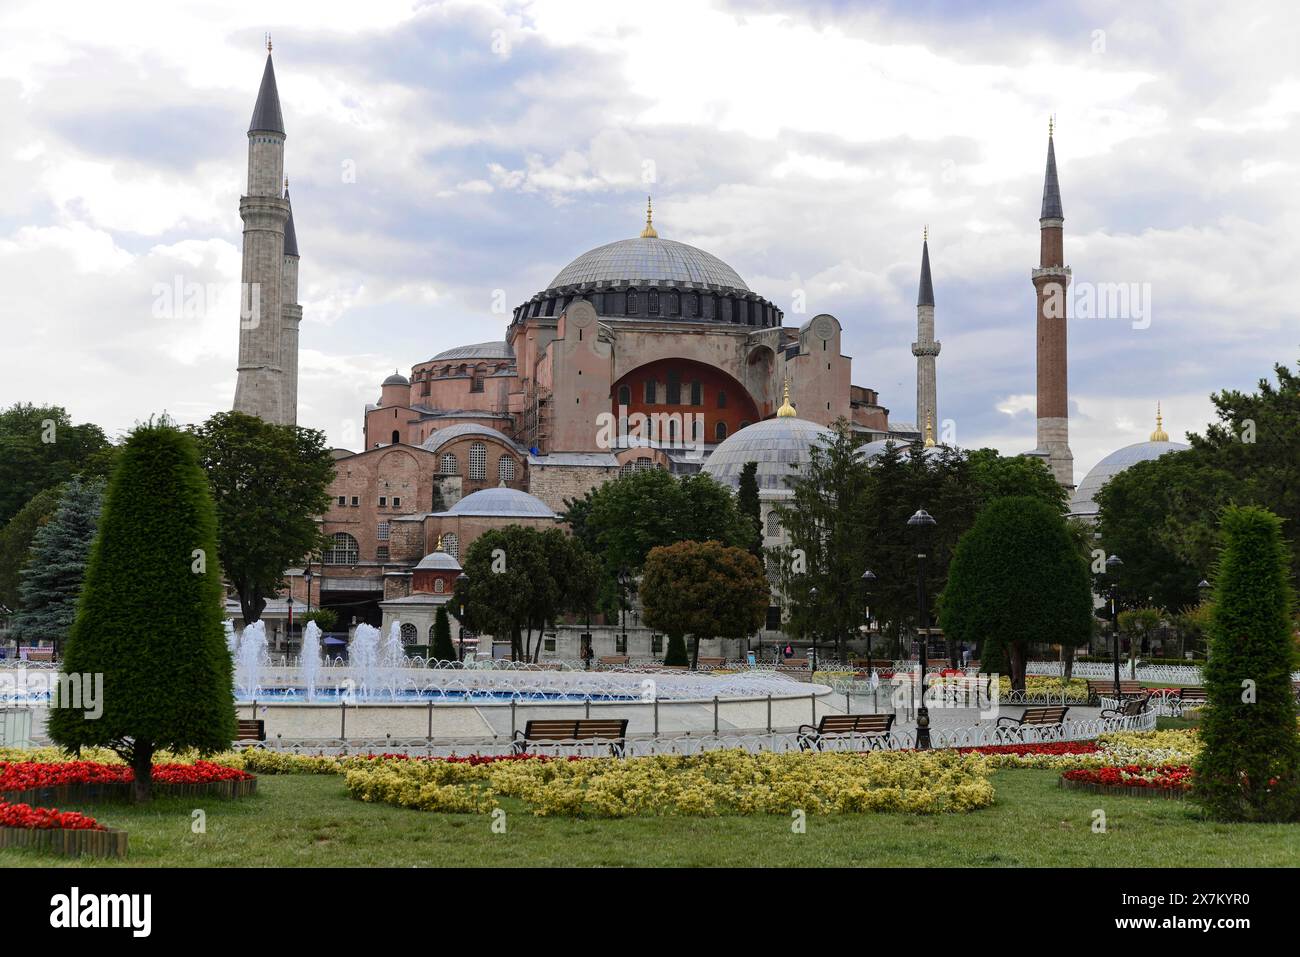 The Hagia Sophia, visible via bubbling water fountains and surrounded by green spaces, Istanbul Modern, Istanbul, Turkey Stock Photo